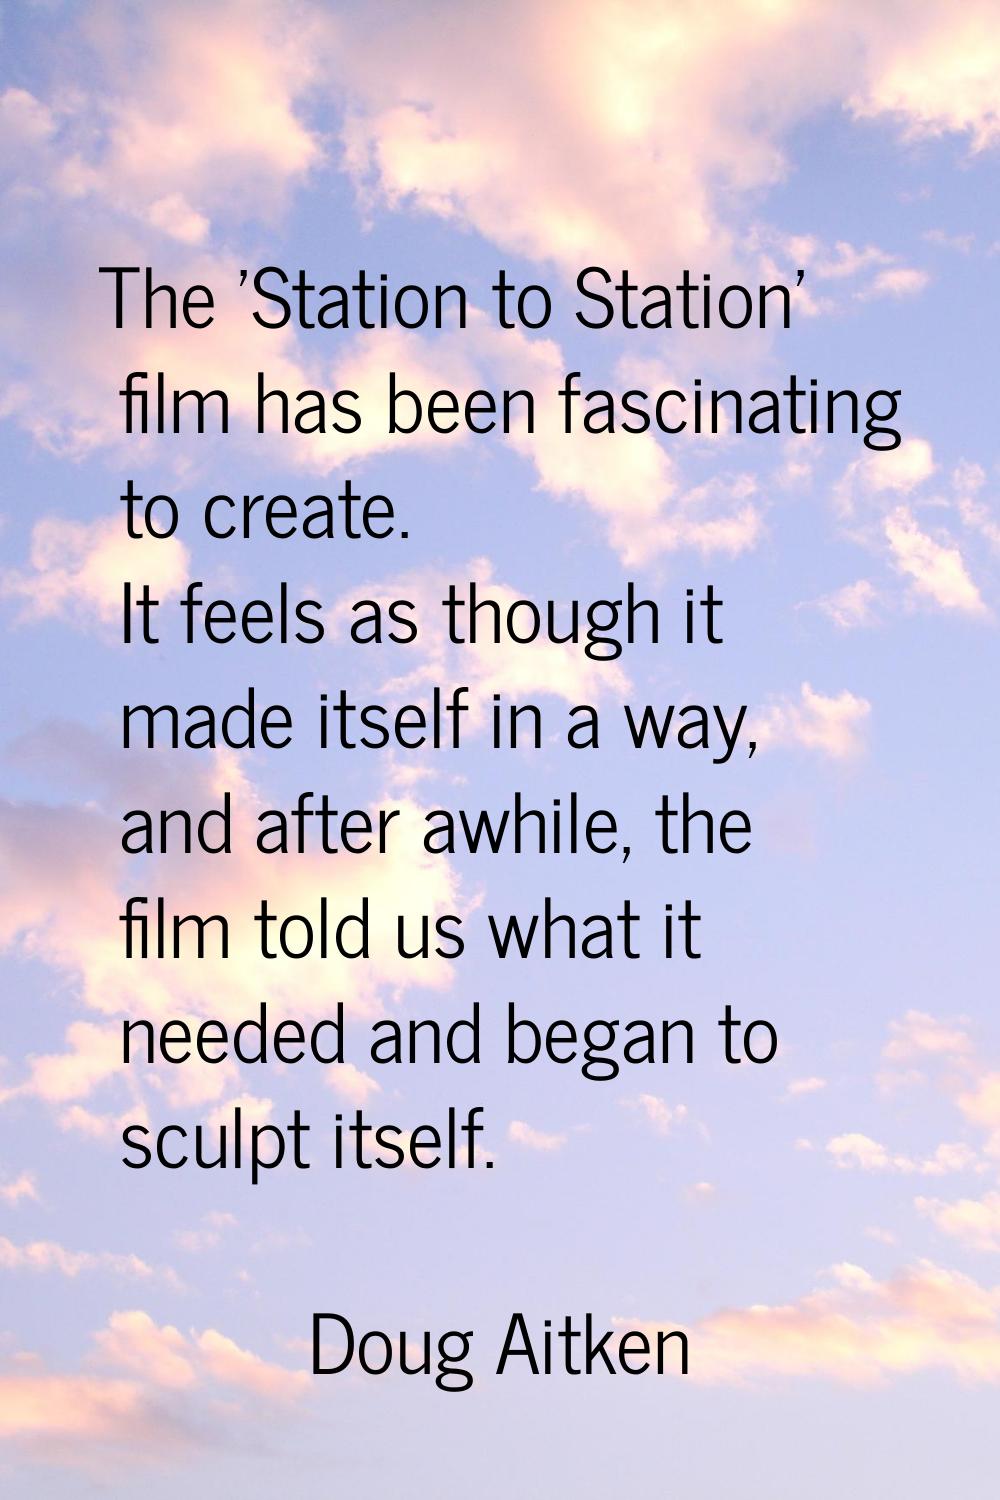 The 'Station to Station' film has been fascinating to create. It feels as though it made itself in 